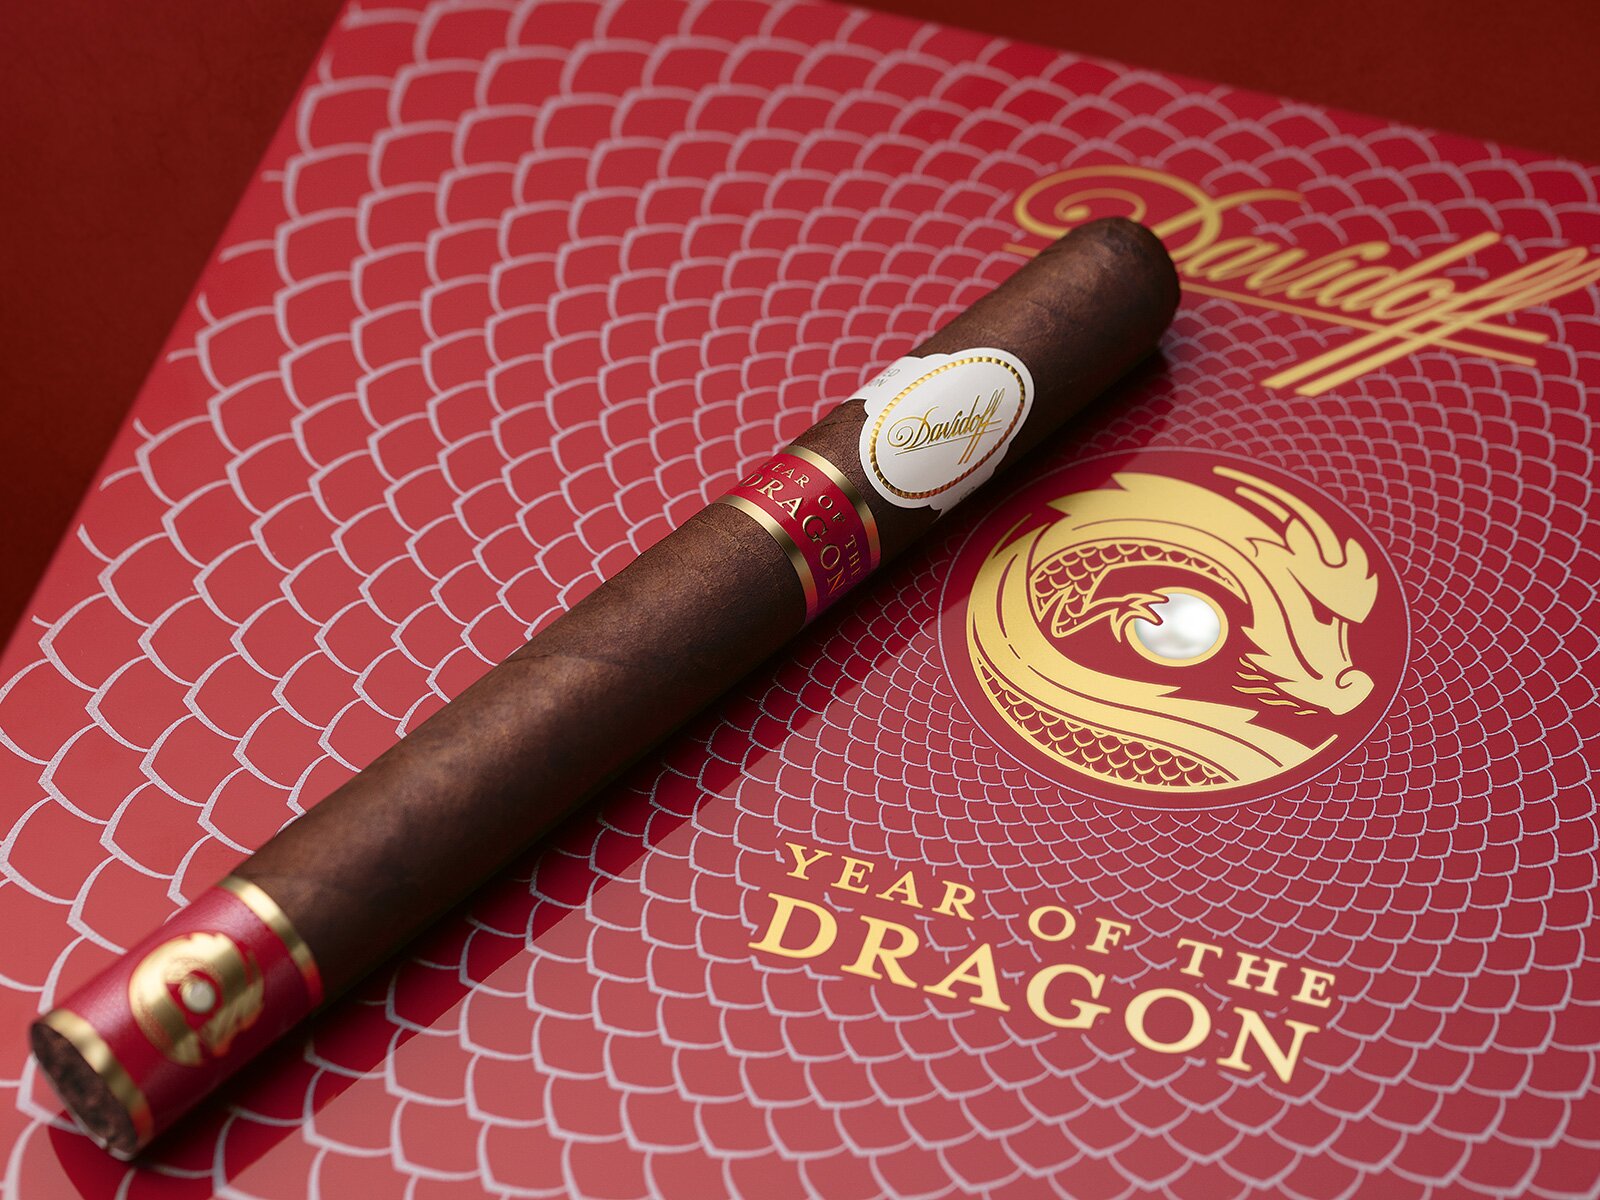 A Davidoff Year of the Dragon Limited Edition double corona cigar placed on the lid of its box.